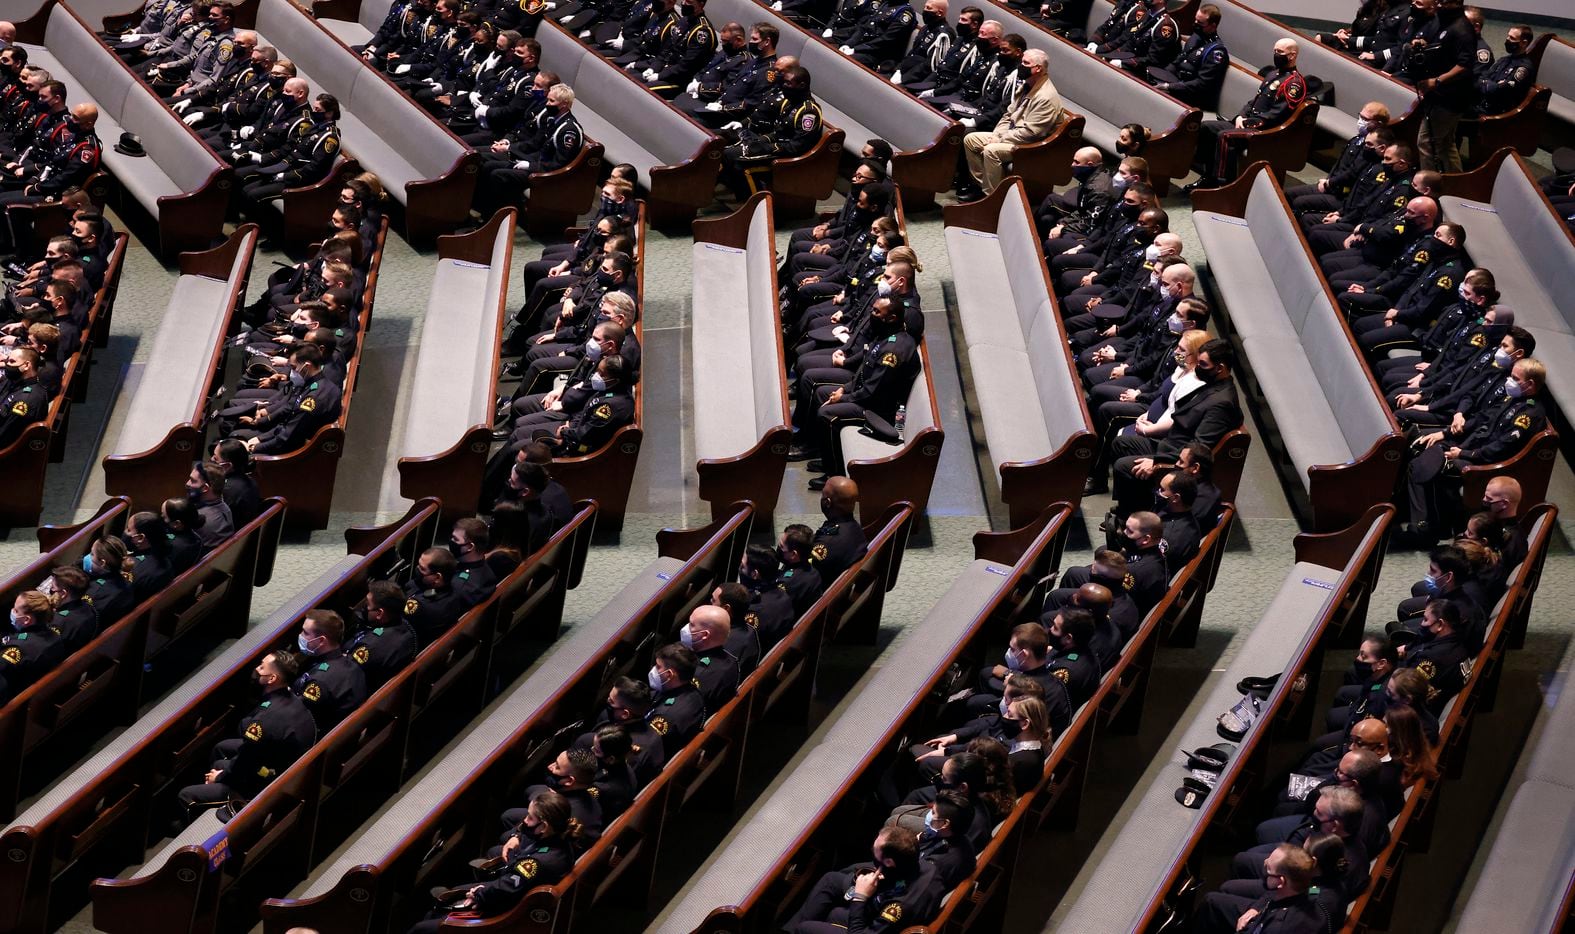 Police officers from departments across the Metroplex are socially distanced in rows as they  attend the funeral service for Dallas Police officer Mitchell Penton at Prestonwood Baptist Church in Plano, Monday, February 22, 2021. Penton was killed Saturday, Feb. 13, 2021, in a crash involving a drunk driving suspect. (Tom Fox/The Dallas Morning News)